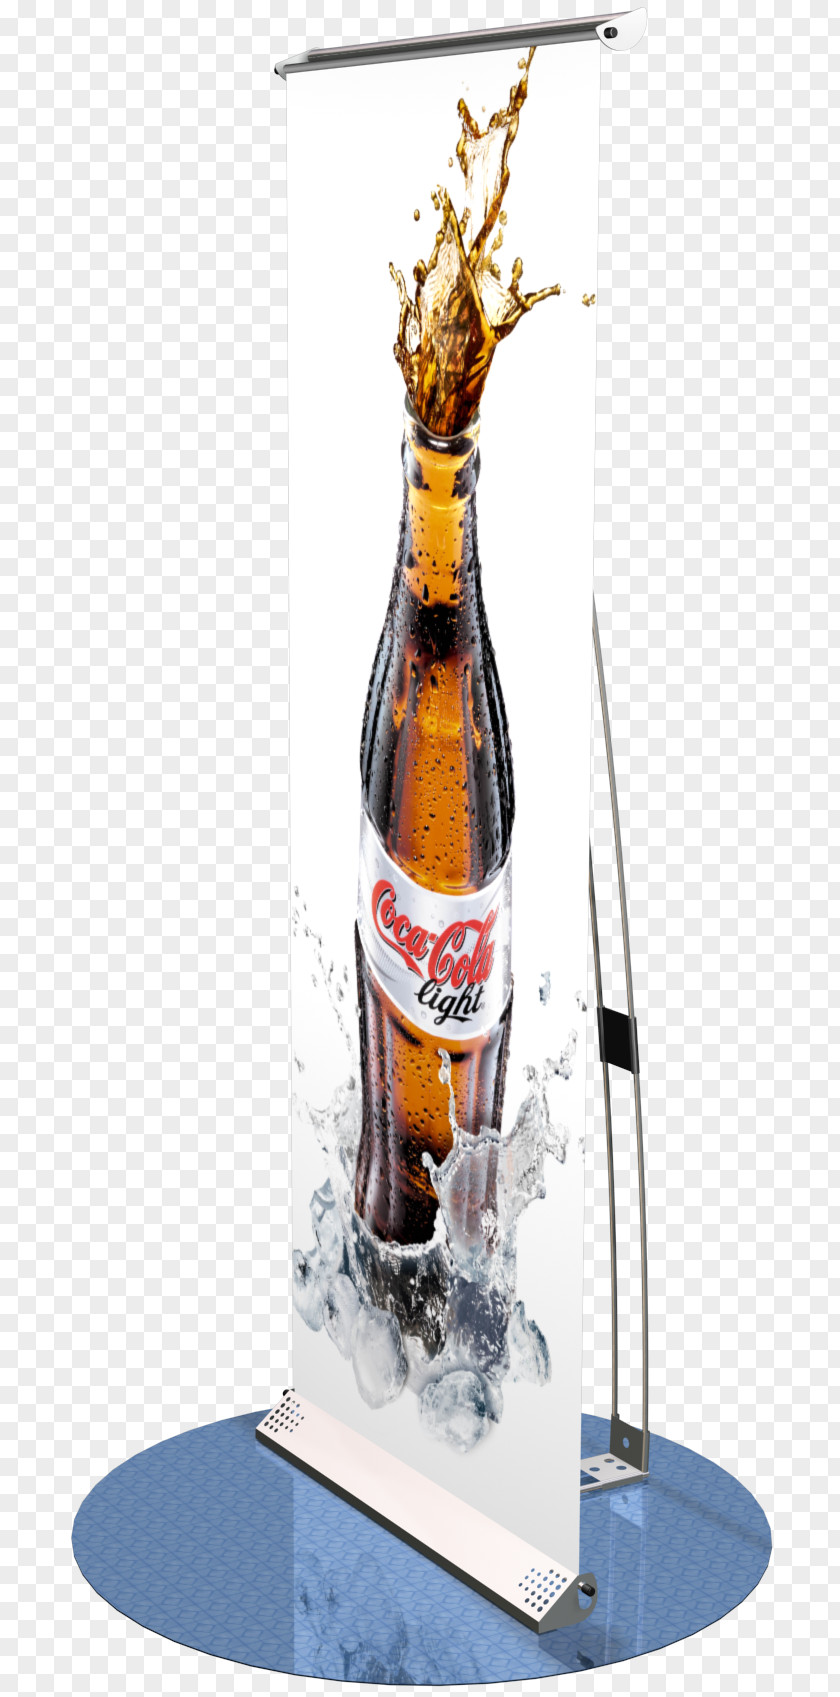 Beer Glass Bottle Fizzy Drinks PNG